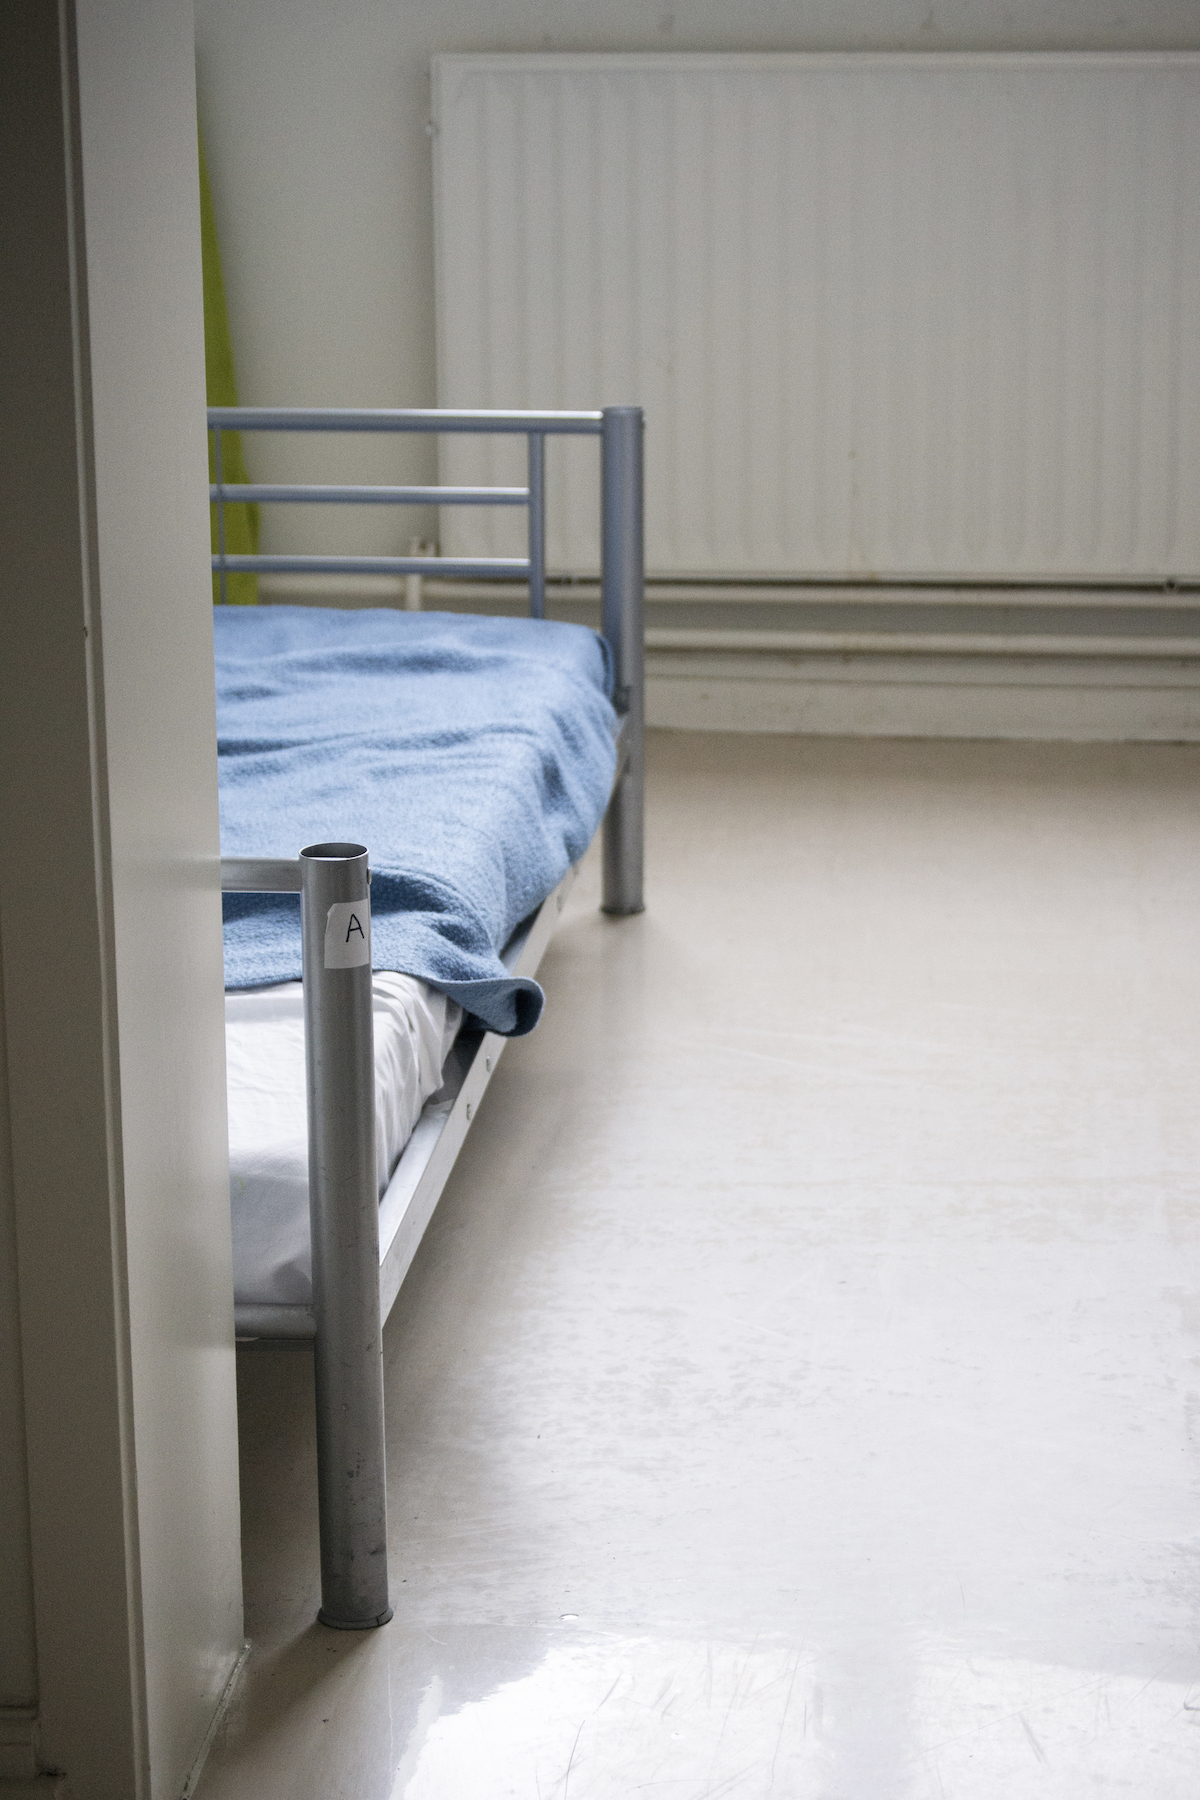 Transit, Brussels – Closeup of a bedroom with a single, metal-frame bad low to the ground.